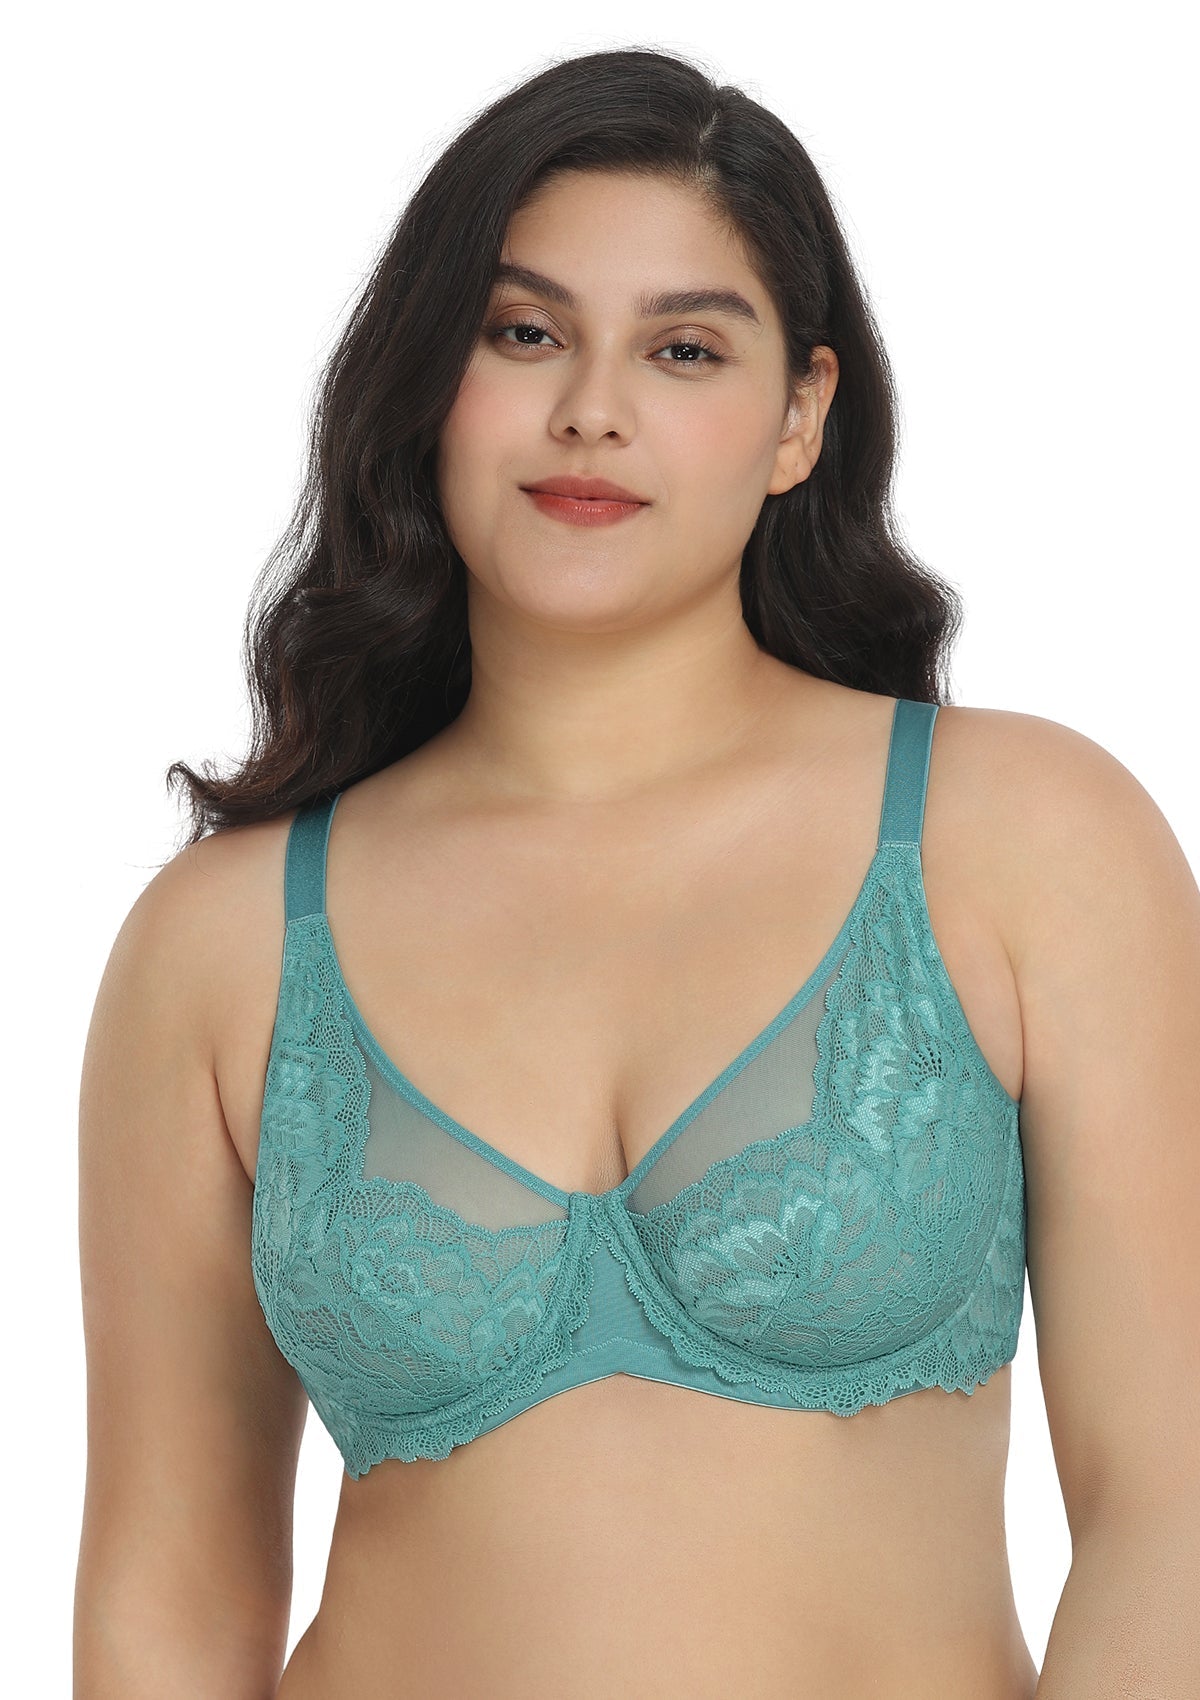 HSIA Paeonia Lace Full Coverage Underwire Non-Padded Uplifting Bra - Dark Blue / 38 / D